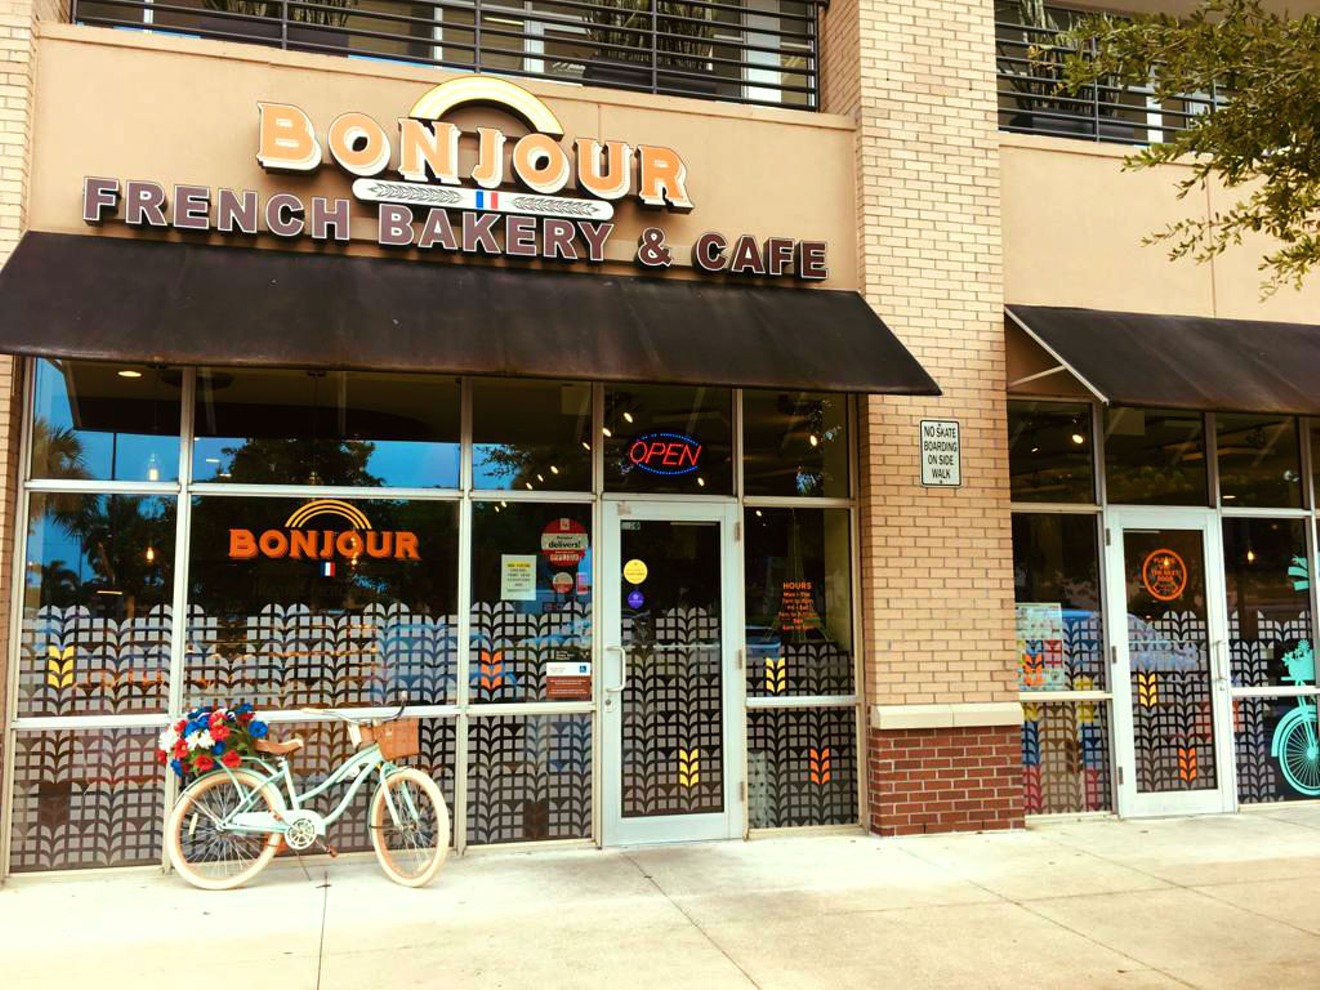 Make Bonjour French Bakery & Cafe your morning spot for coffee.